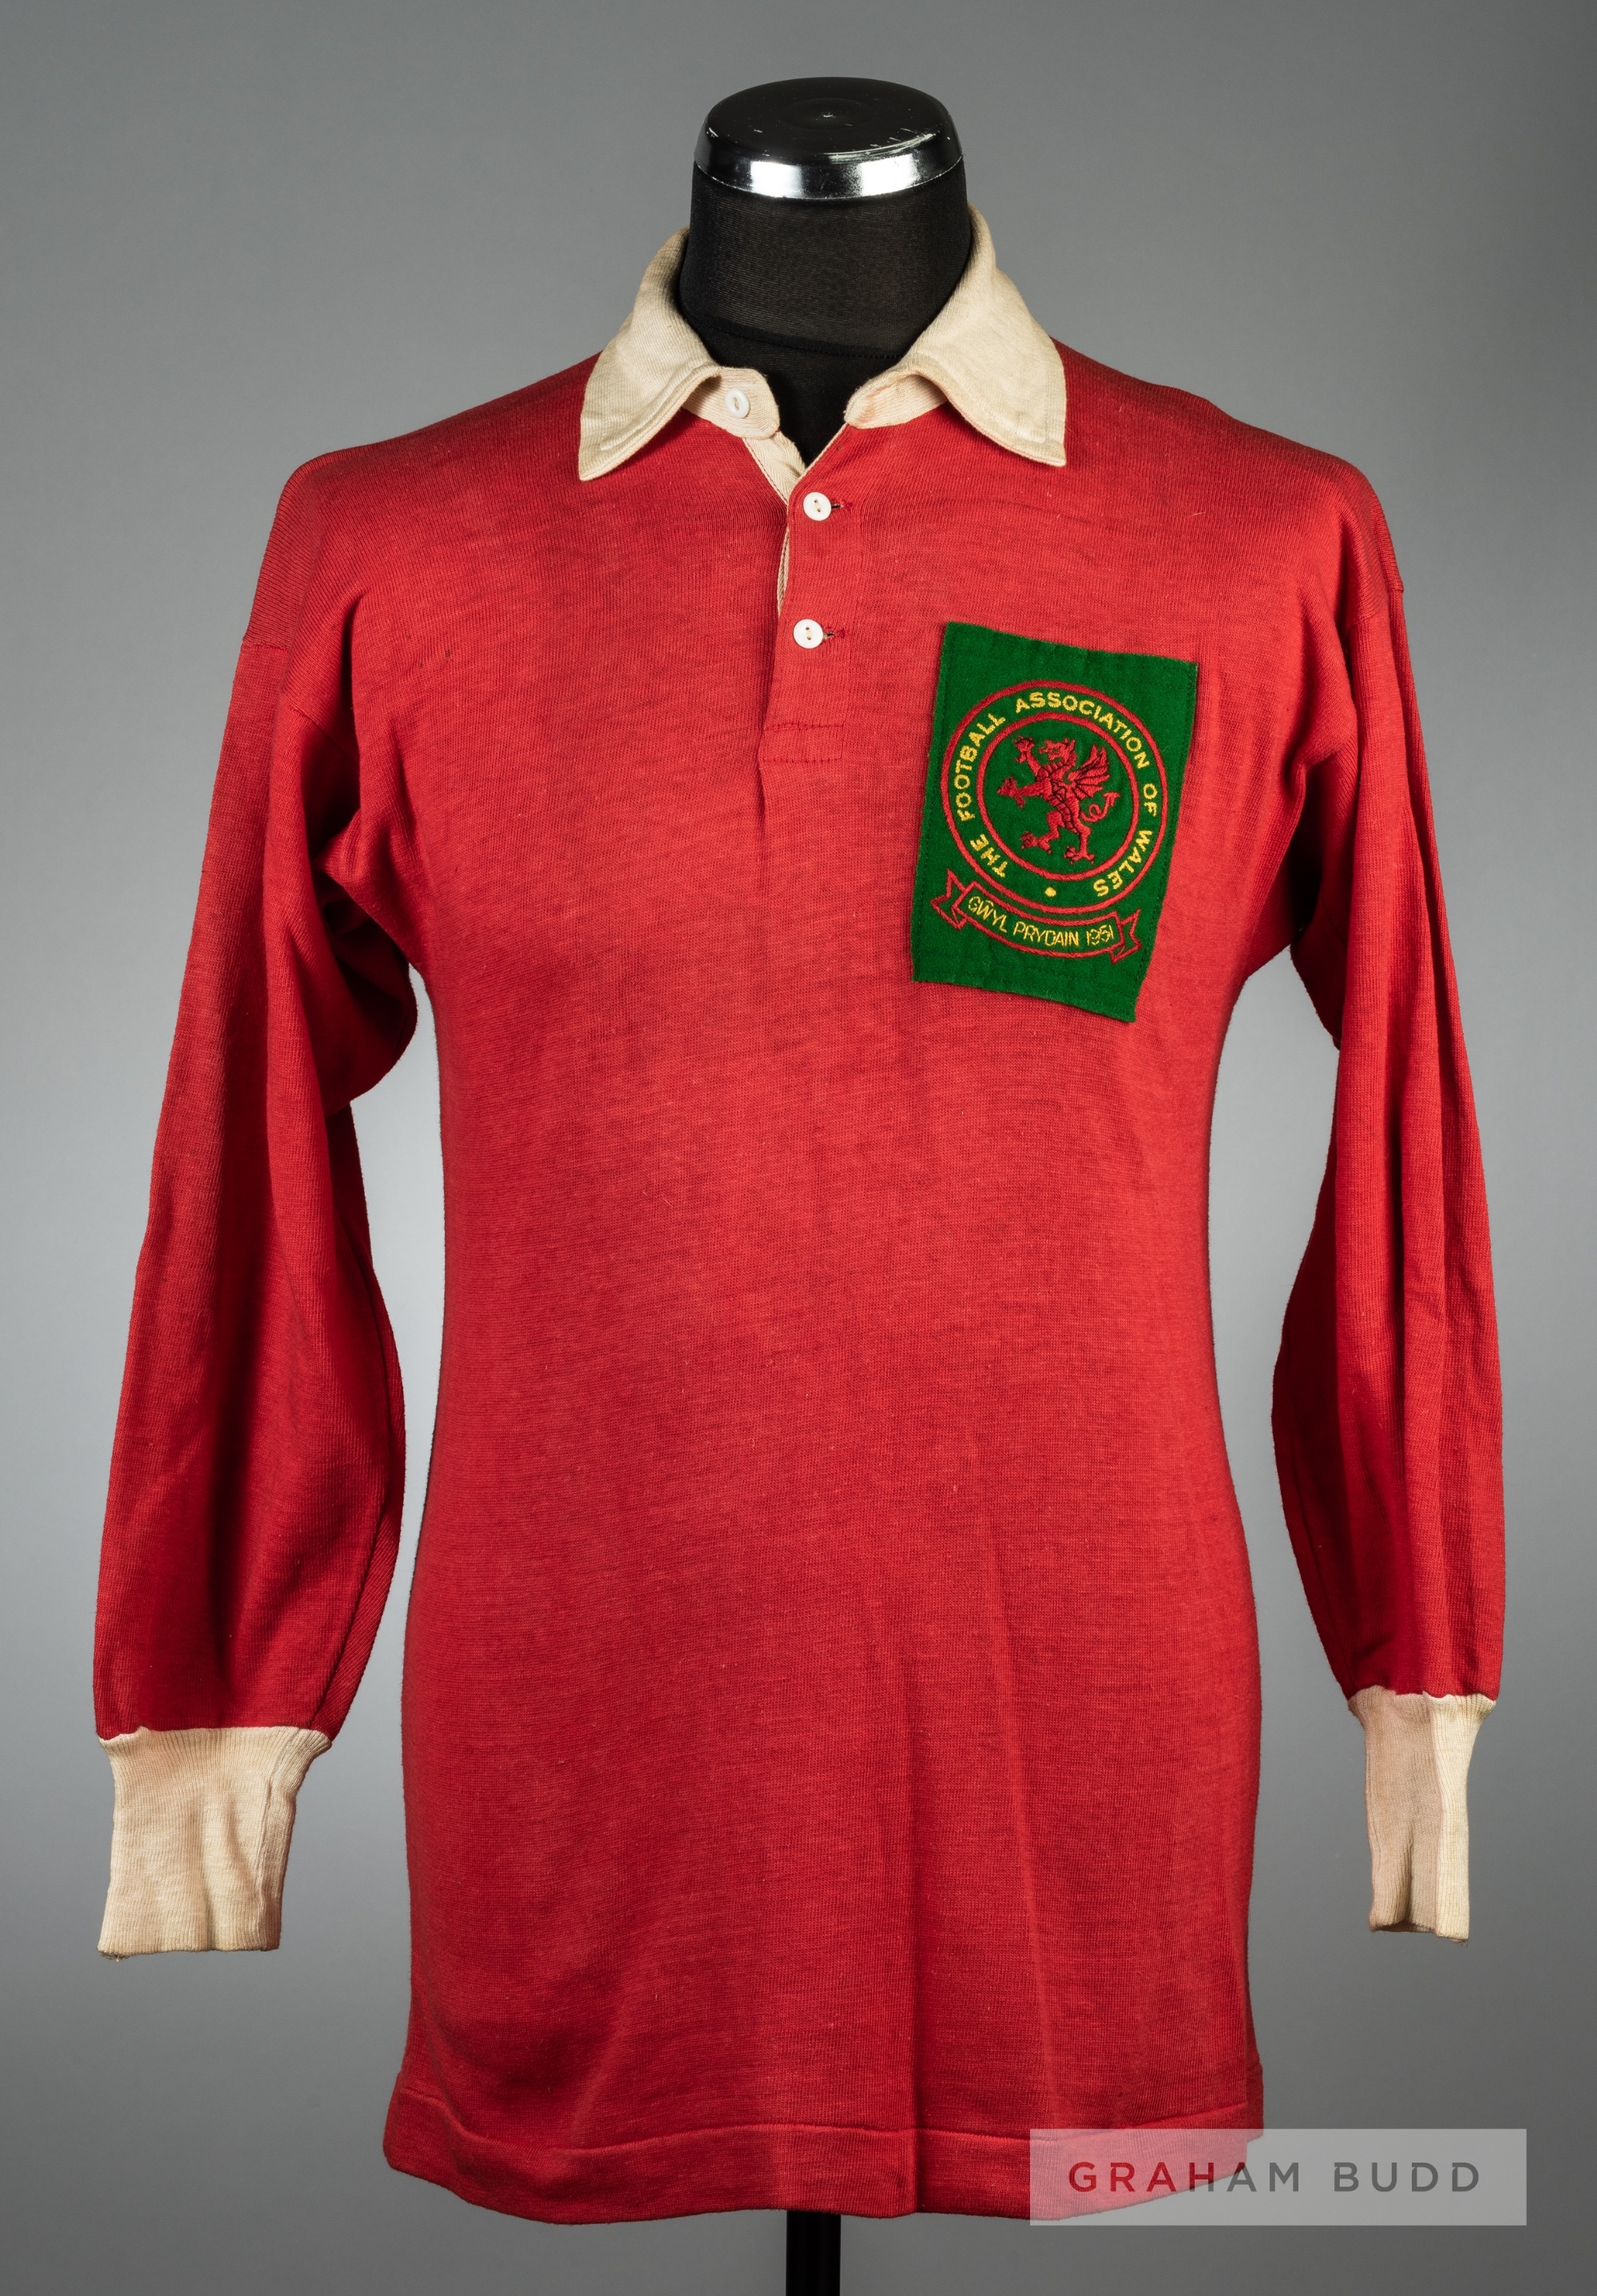 Trevor Ford red Wales No.9 jersey worn in the 1951 Festival of Britain International football